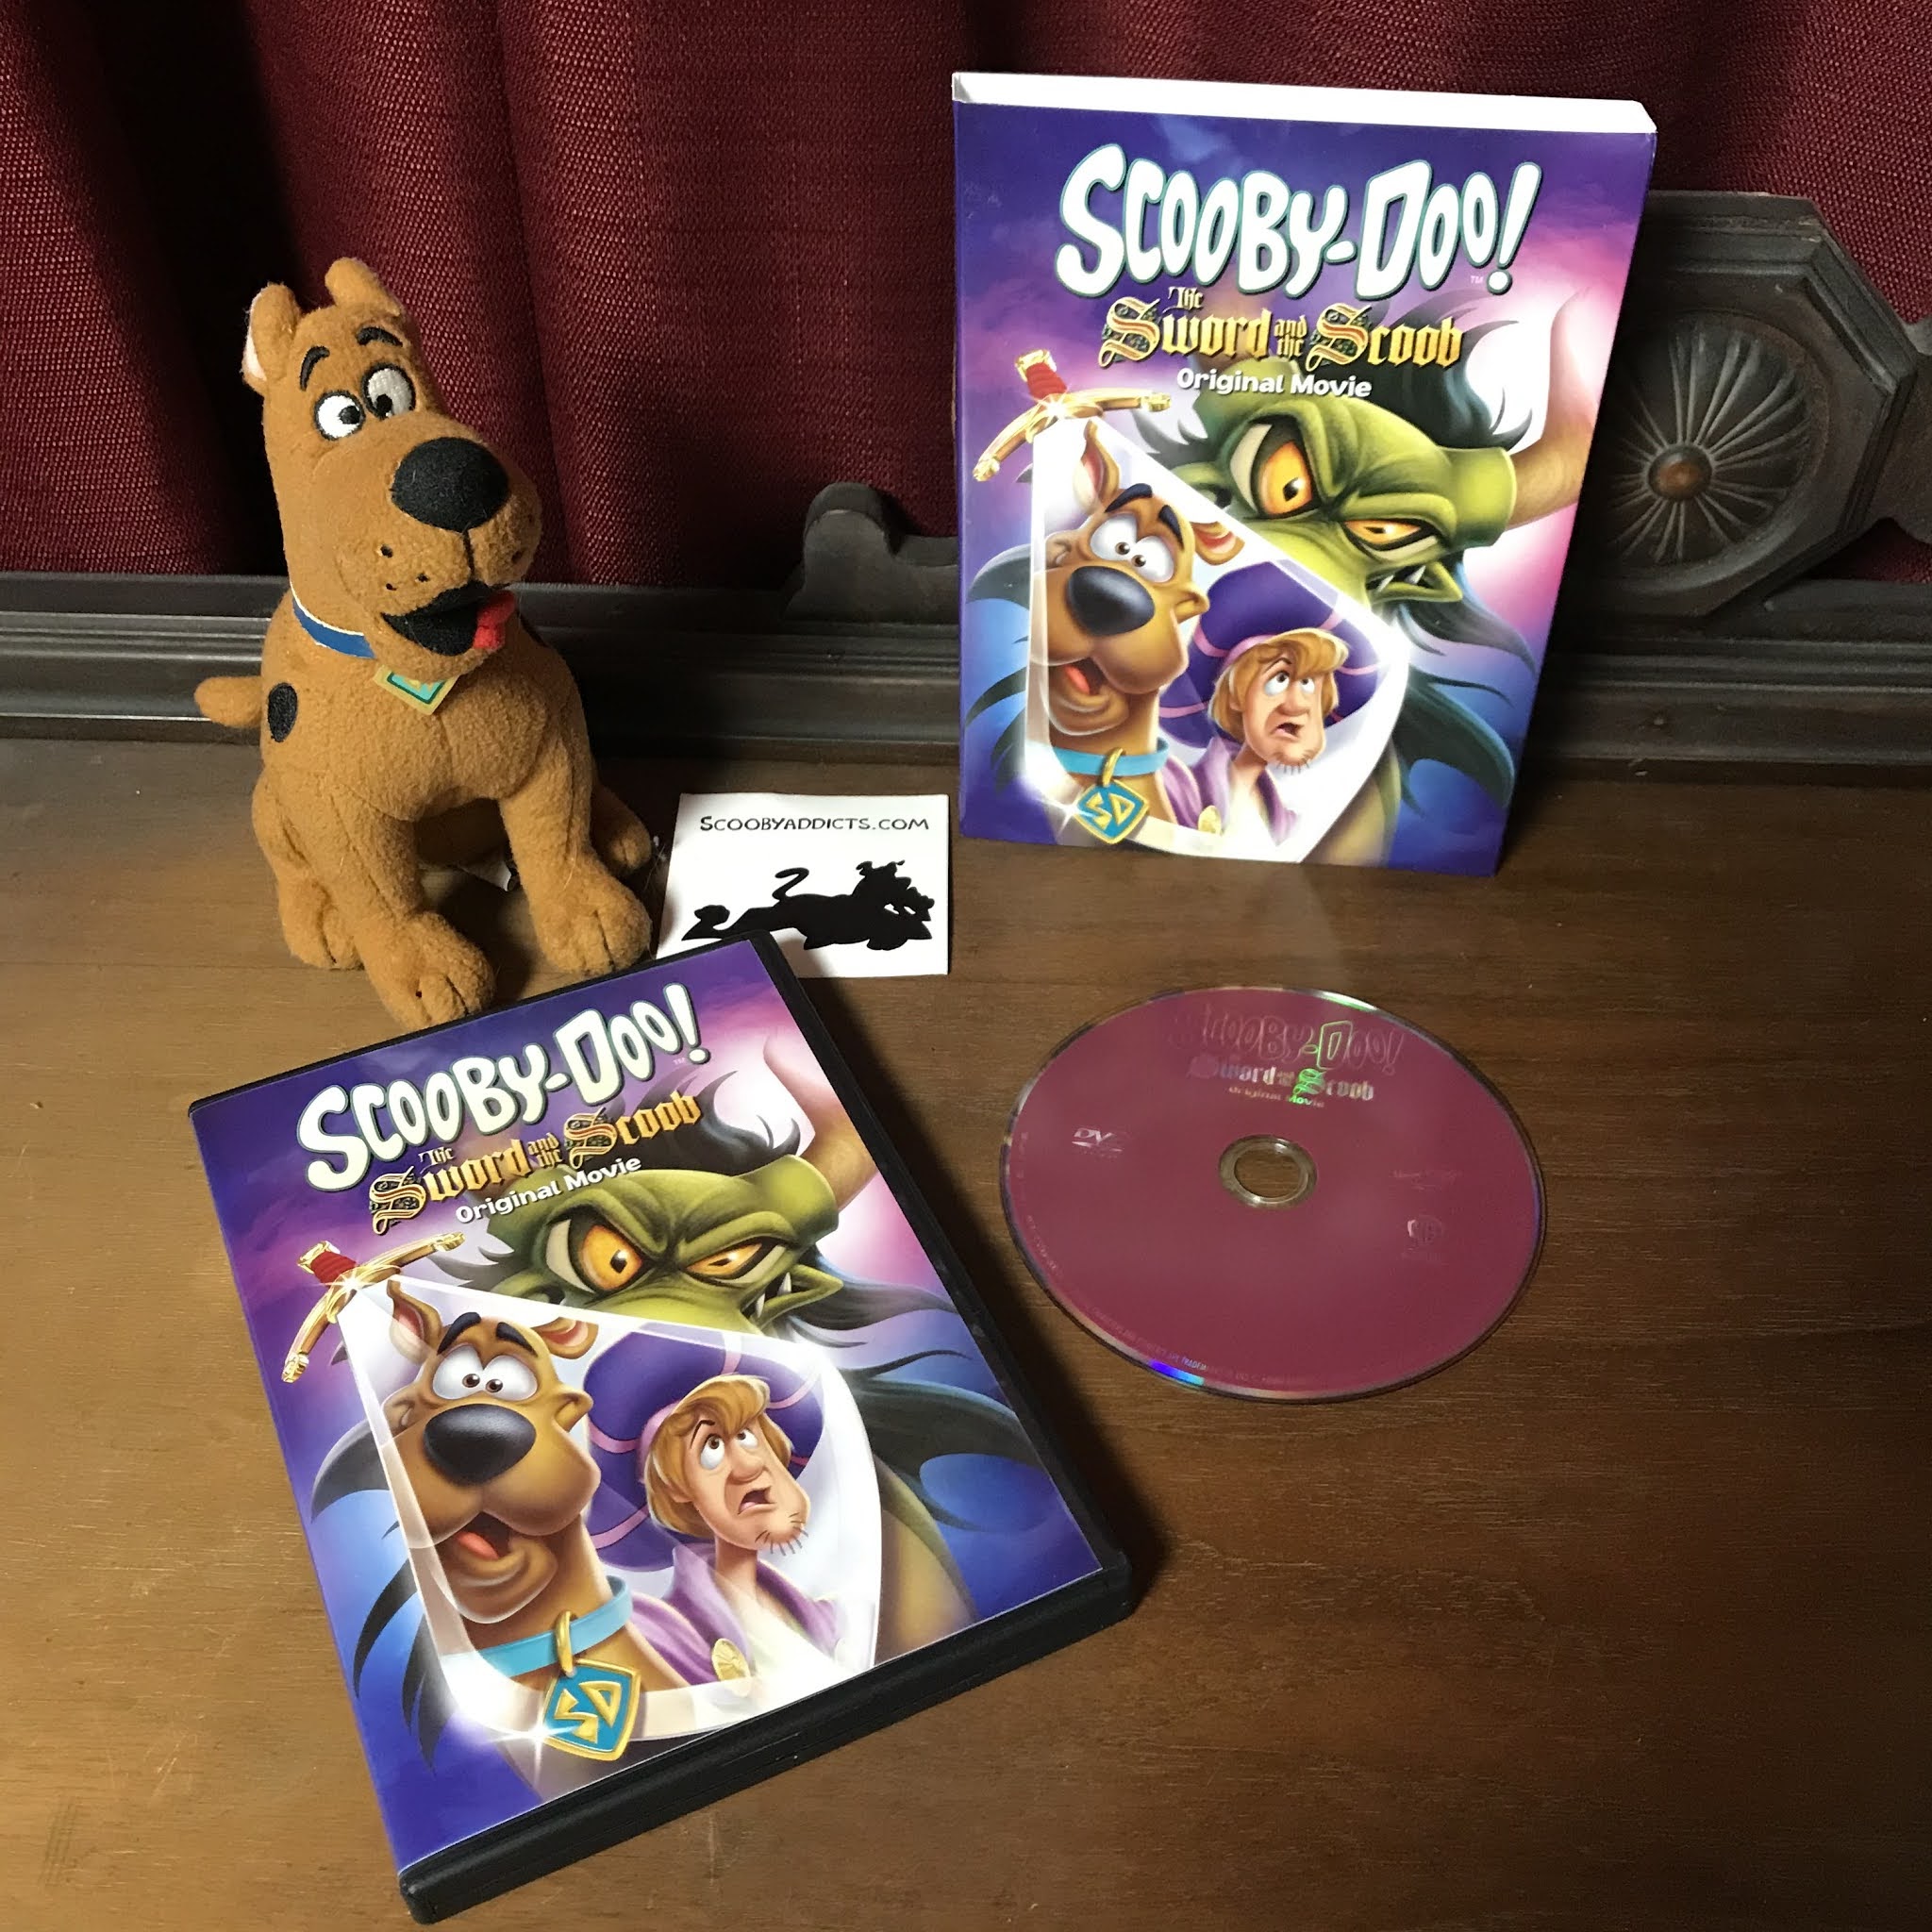 Watch Scooby-Doo! The Sword and the Scoob!